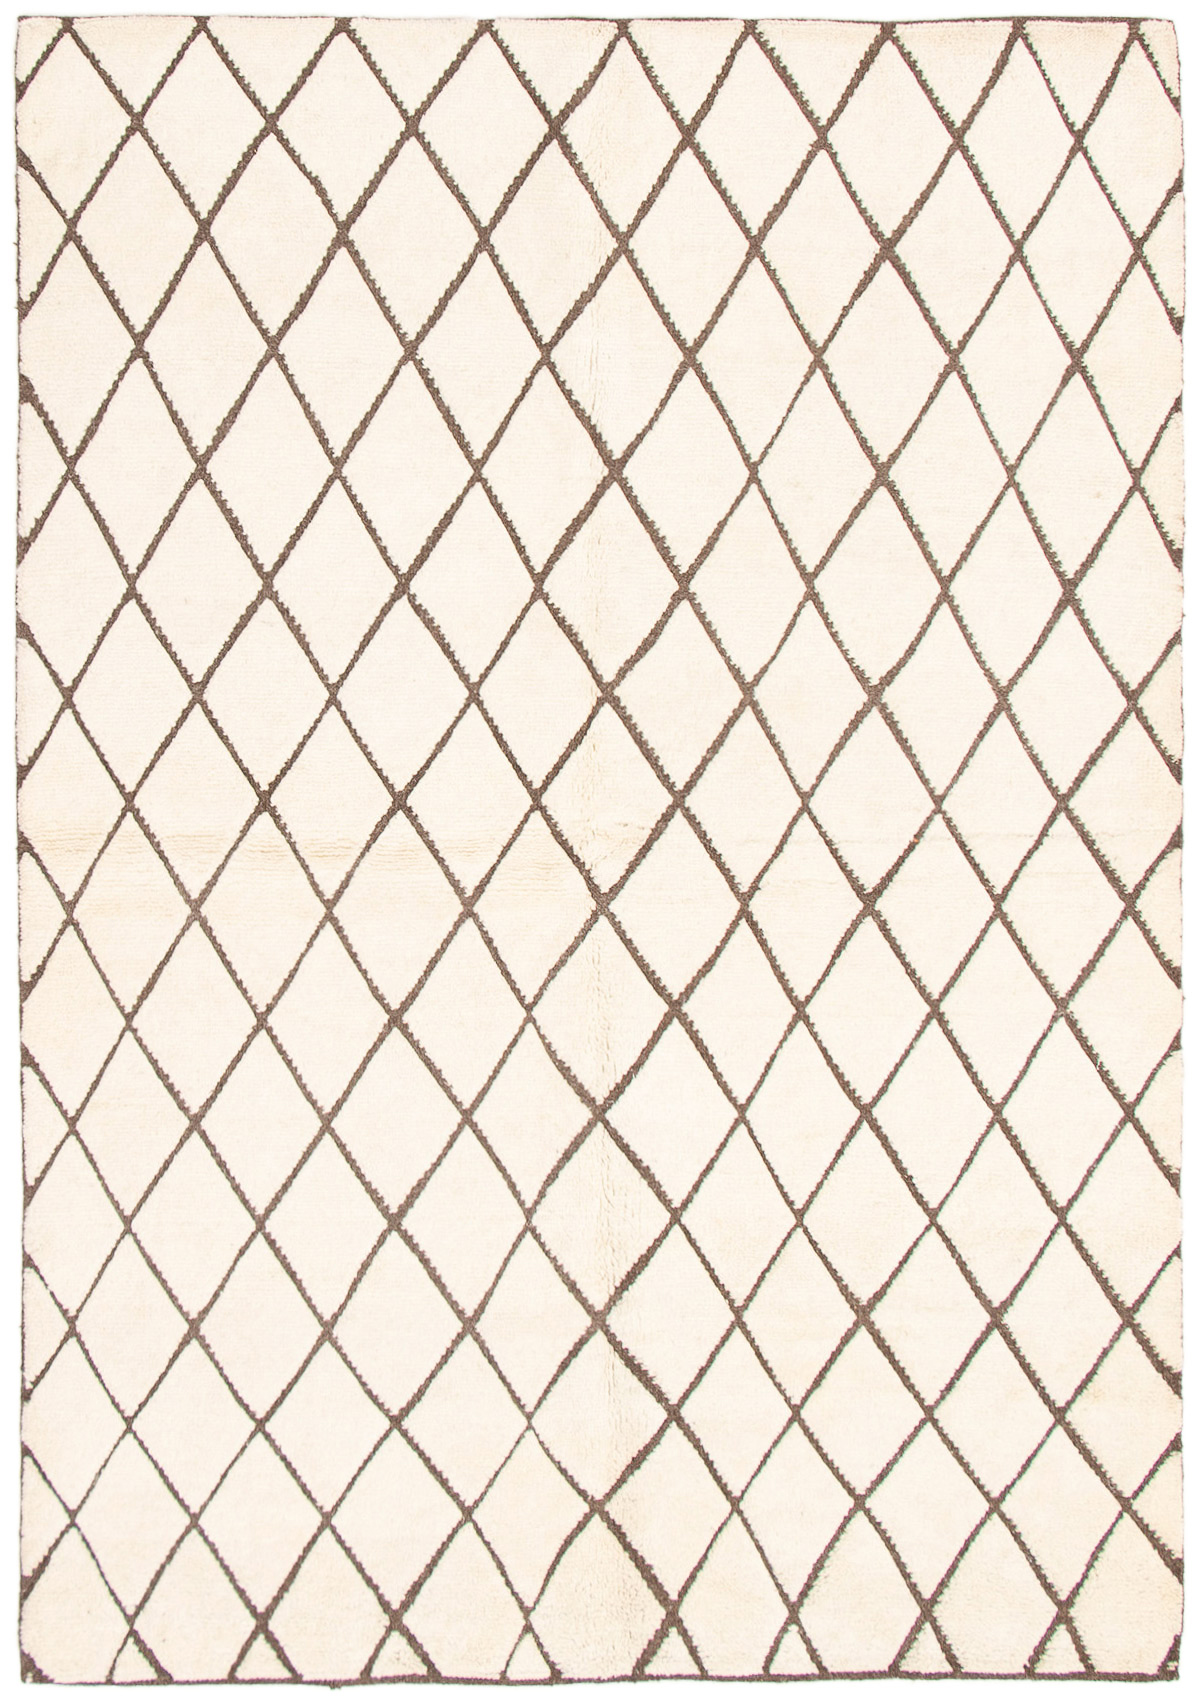 Hand-knotted Arlequin Cream Wool Rug 6'2" x 9'0" Size: 6'2" x 9'0"  